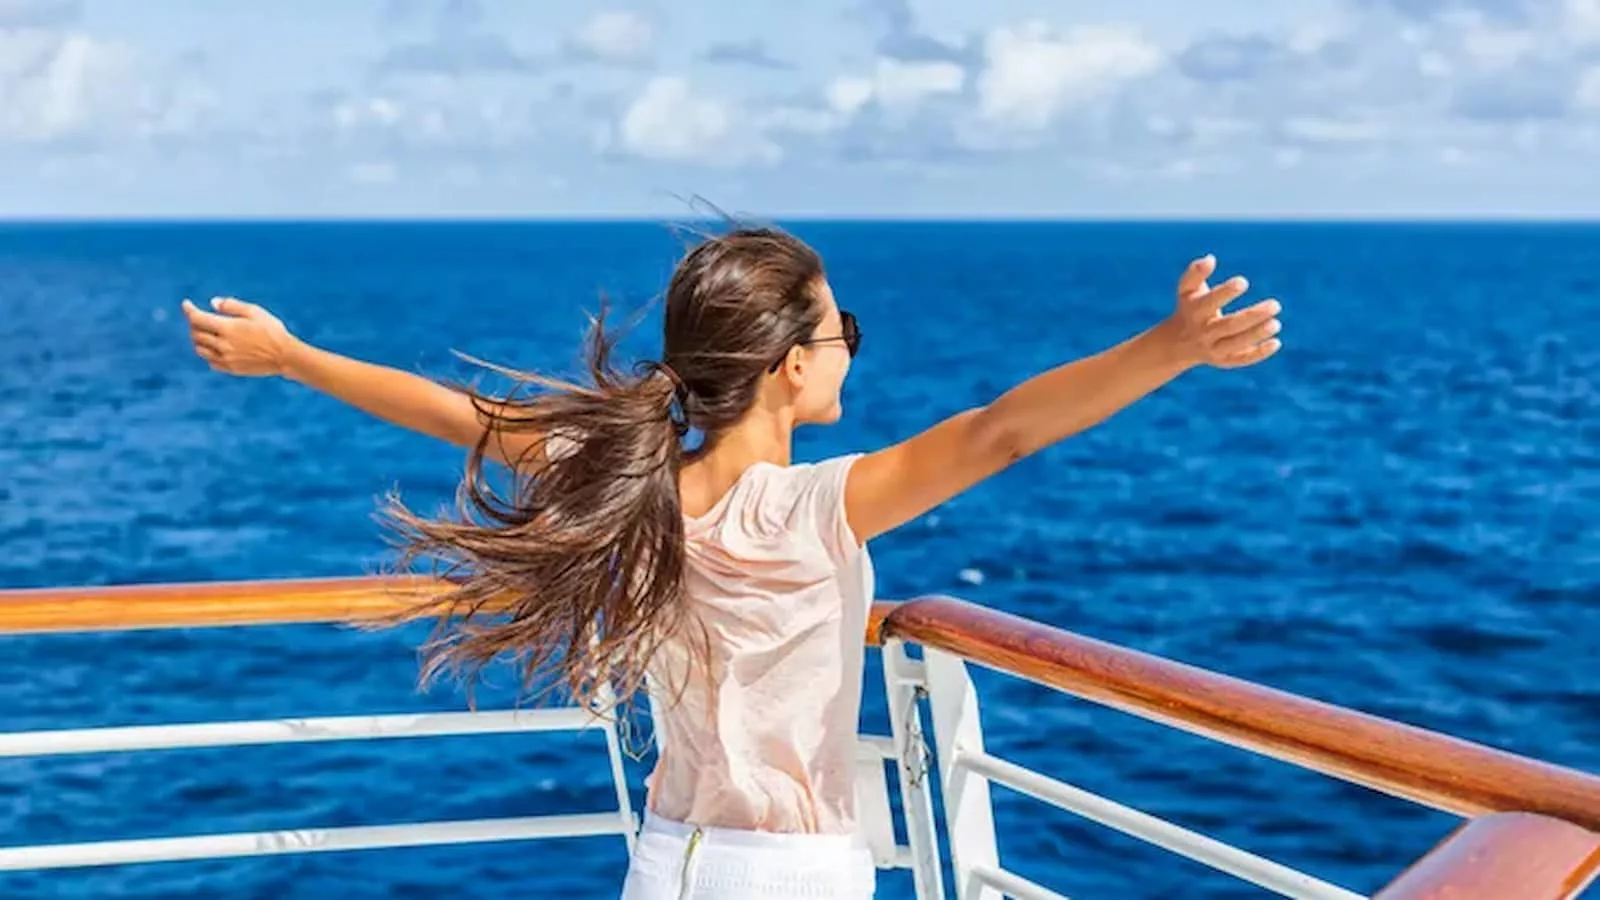 12 Things Solo Cruisers Should Know, Solo Cruisers, Waste Money on Cruise, how to not Waste Money on Cruise